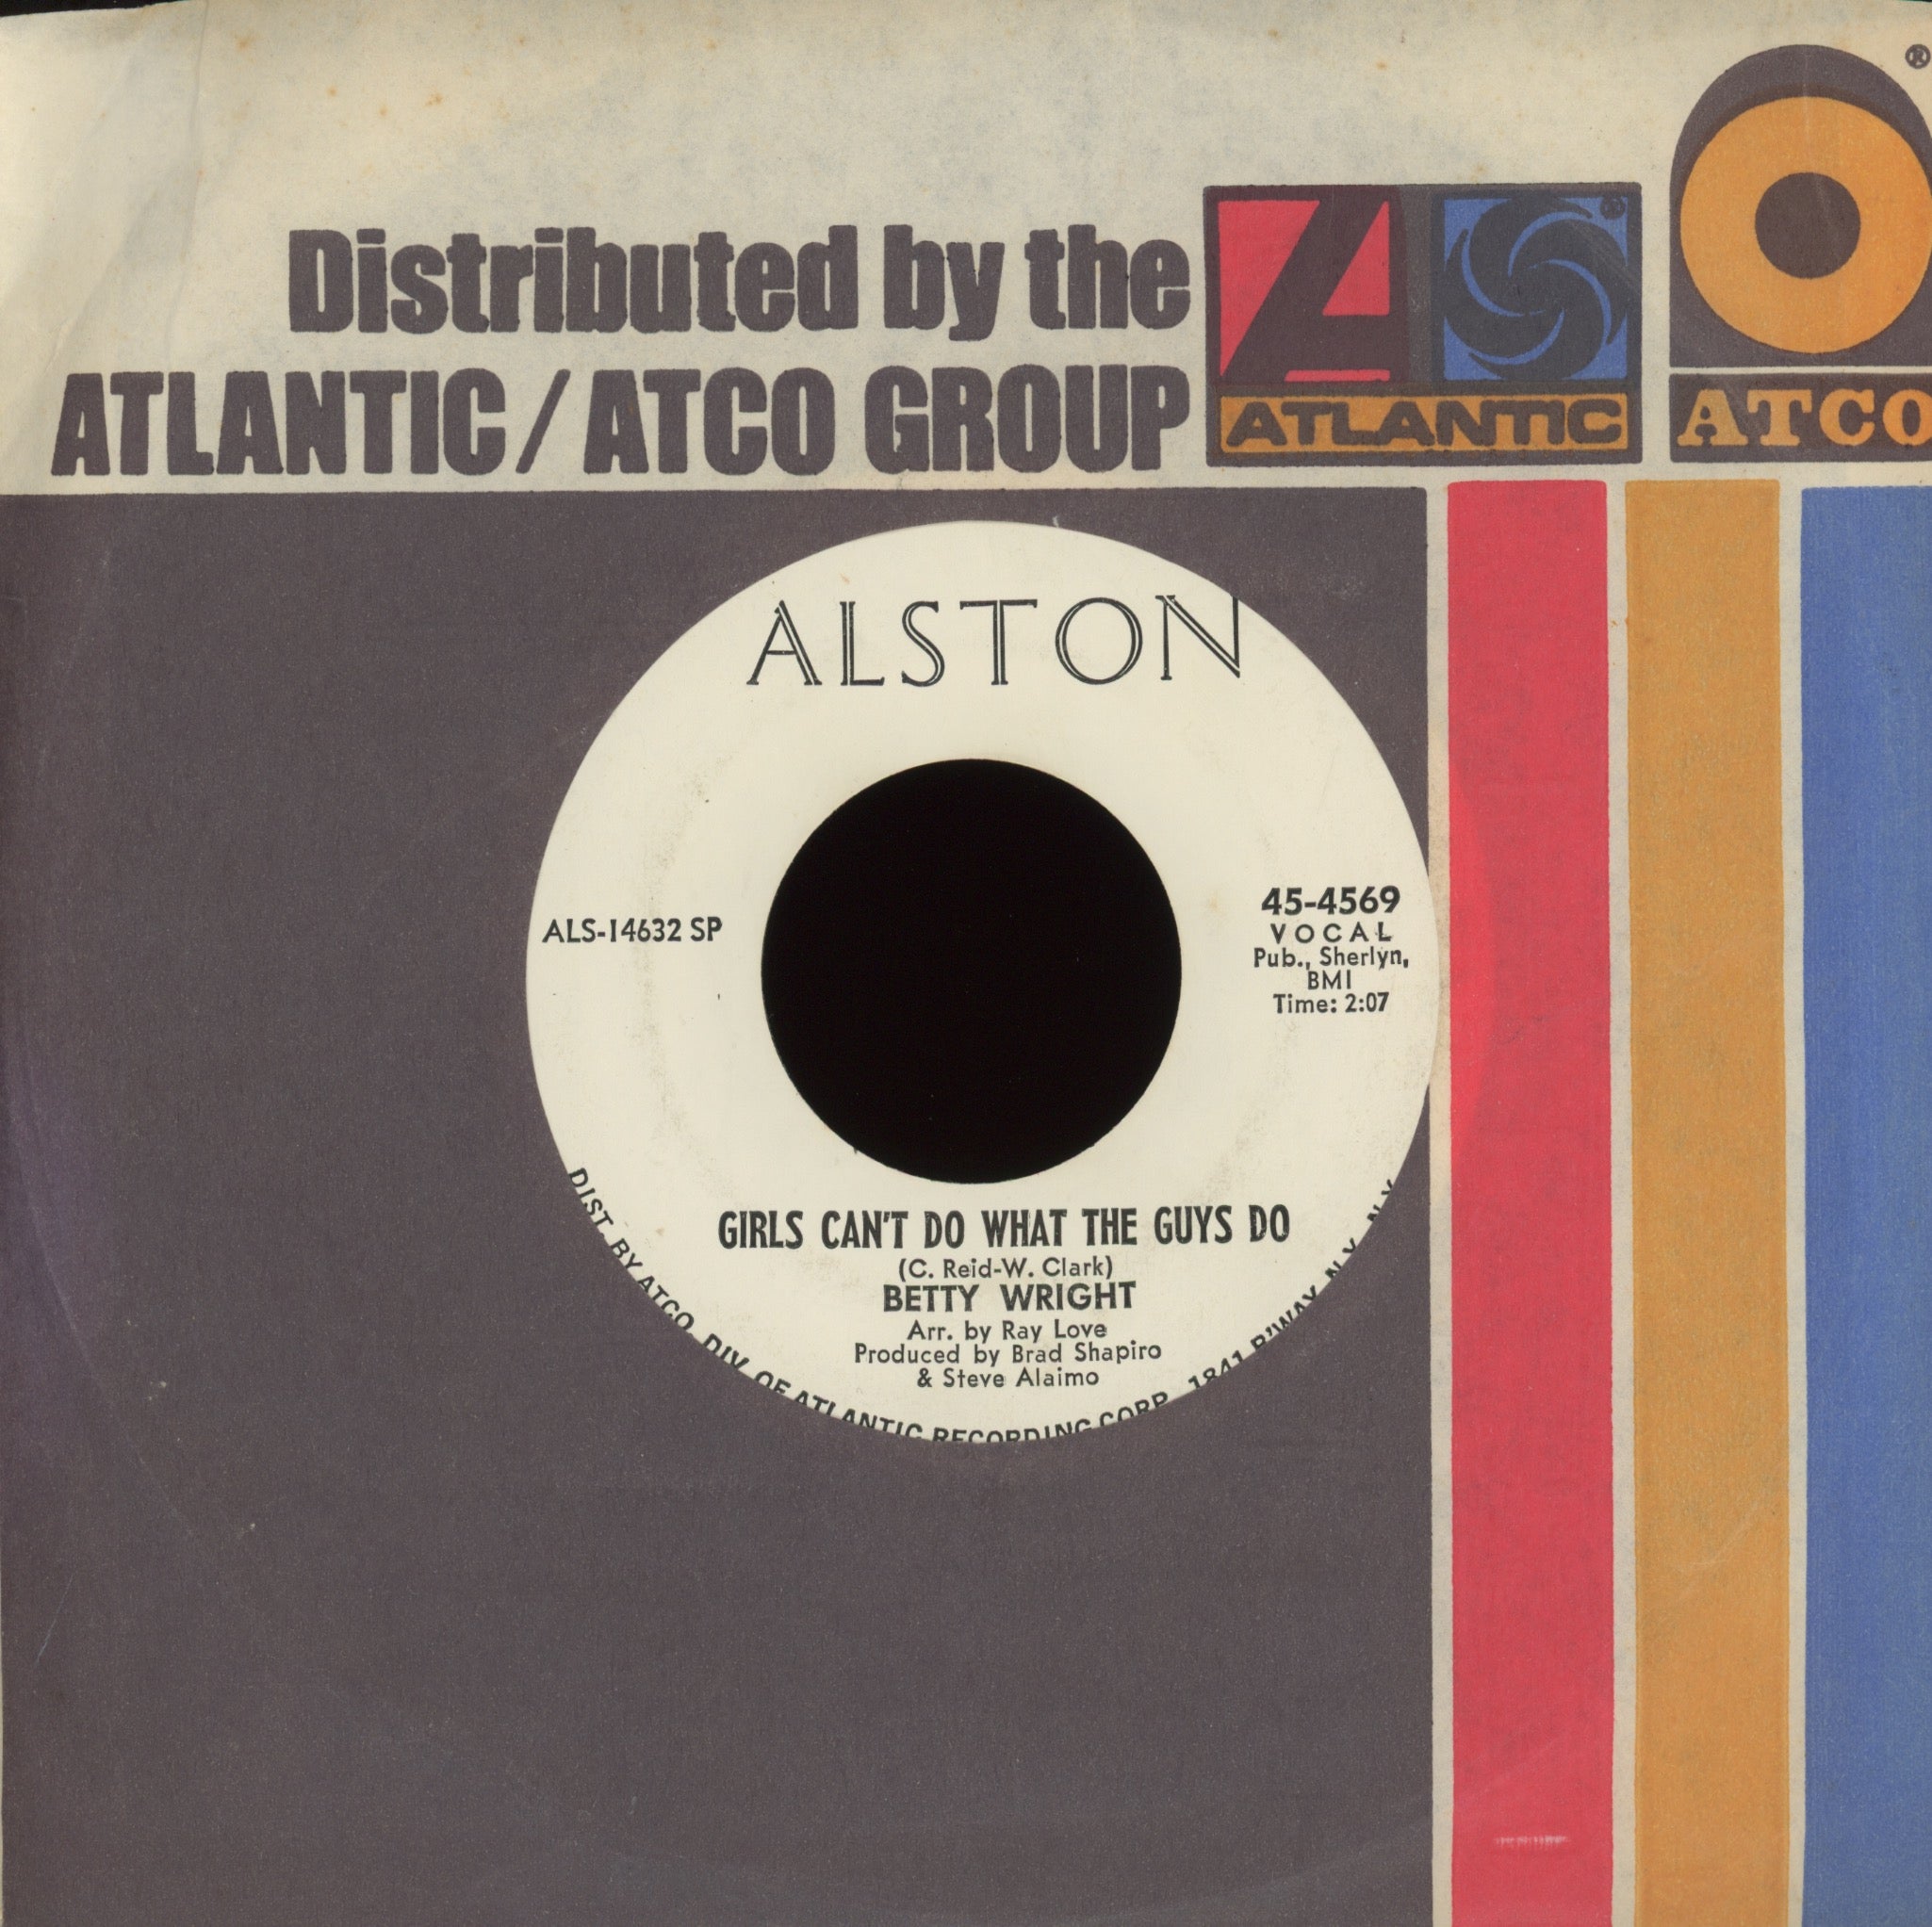 Betty Wright - Girls Can't Do What The Guys Do on Alston Promo Crossover Soul 45